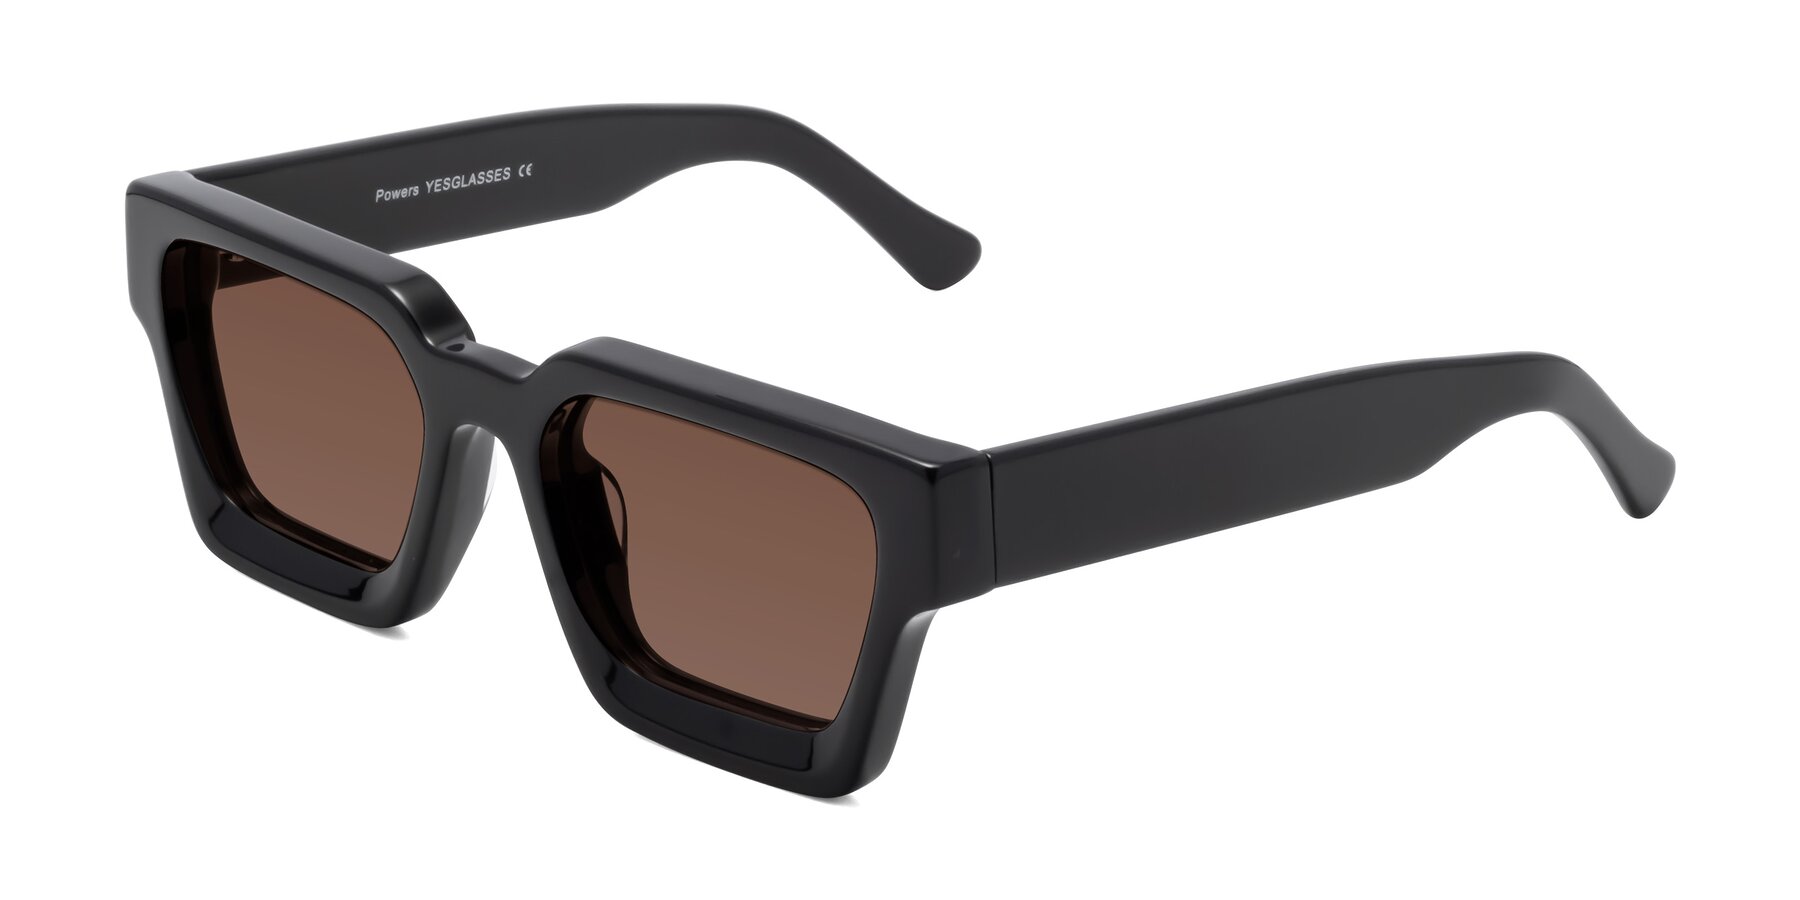 Angle of Powers in Black with Brown Tinted Lenses